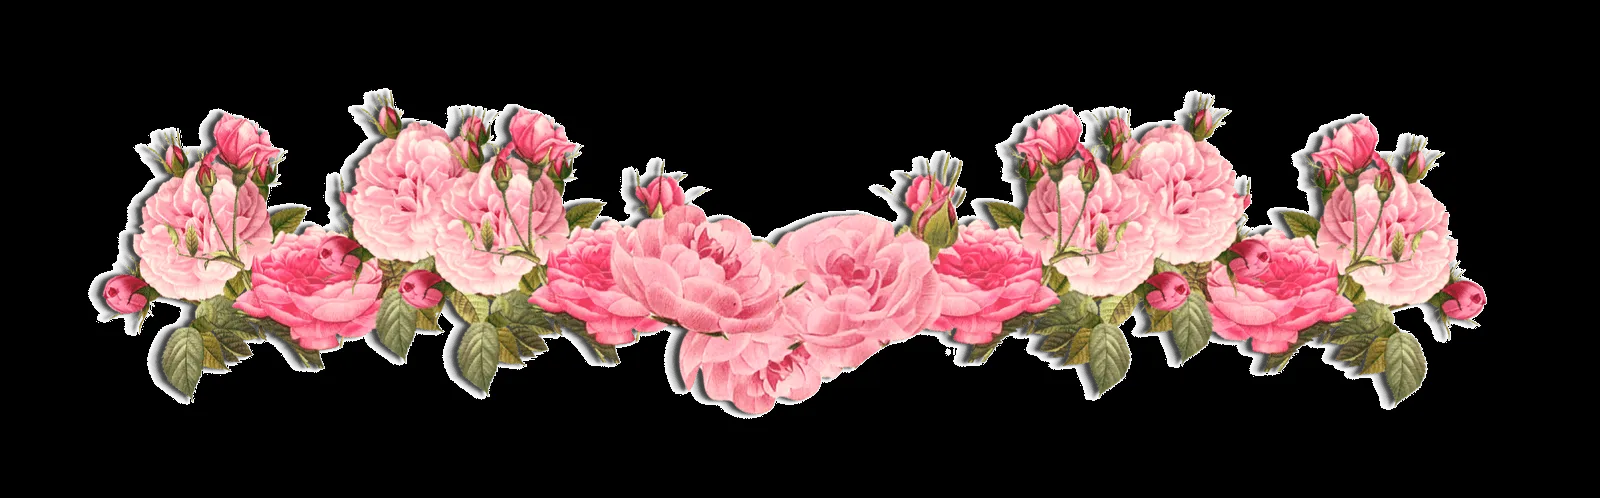 Images For > Pink Roses Border